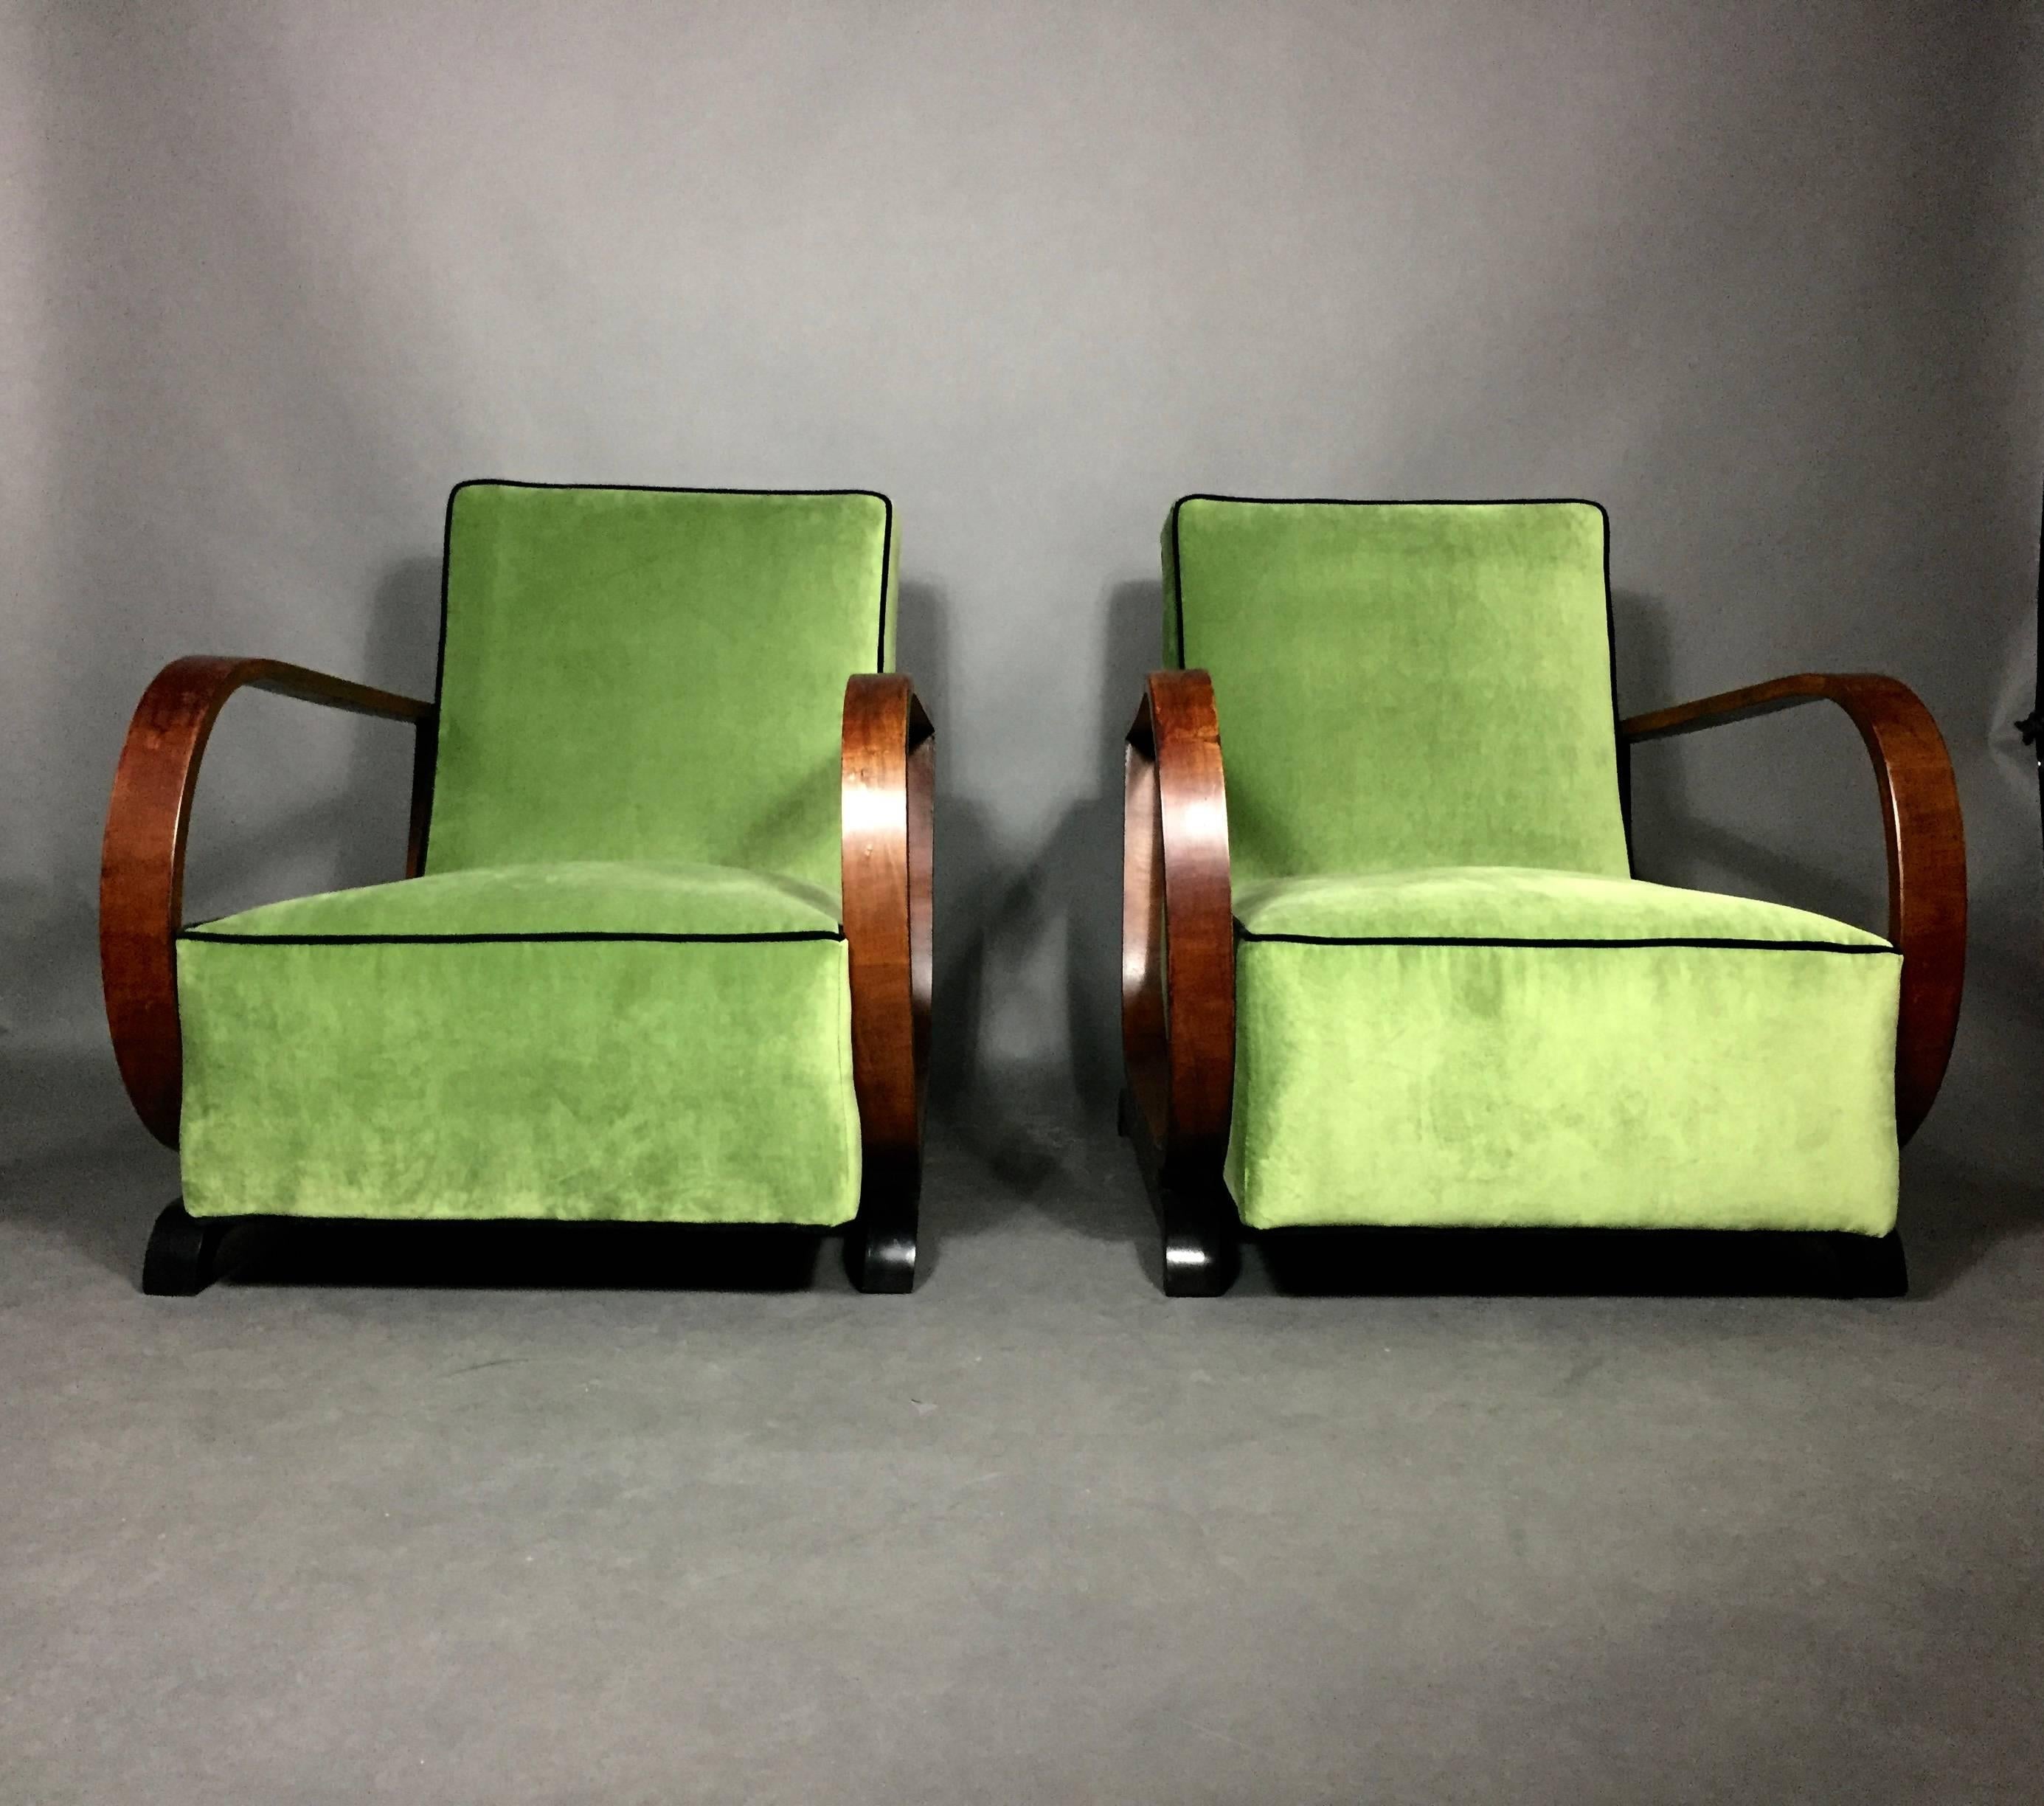 Scale and presence for this pair of low profile Art Deco lounge chairs with Classic curved arms veneered in walnut. New luscious green velvet upholstery with black contrast cording. Bottom black leg/support is a likely renewal. Very minor uneven